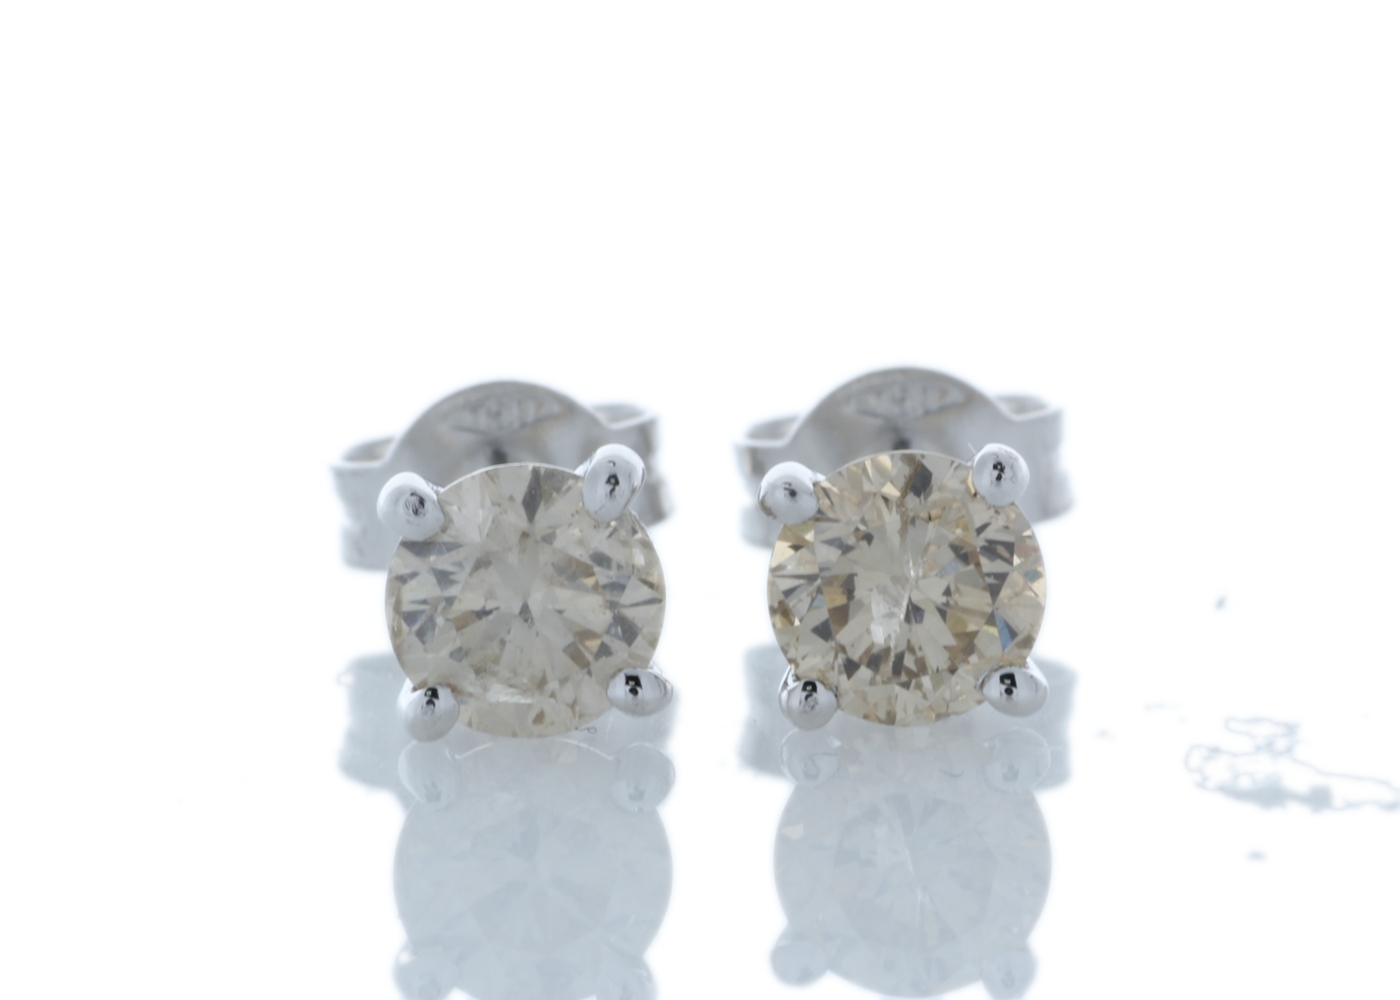 18ct White Gold Single Stone Prong Set Diamond Earring 1.22 Carats - Valued By GIE £6,360.00 - Two